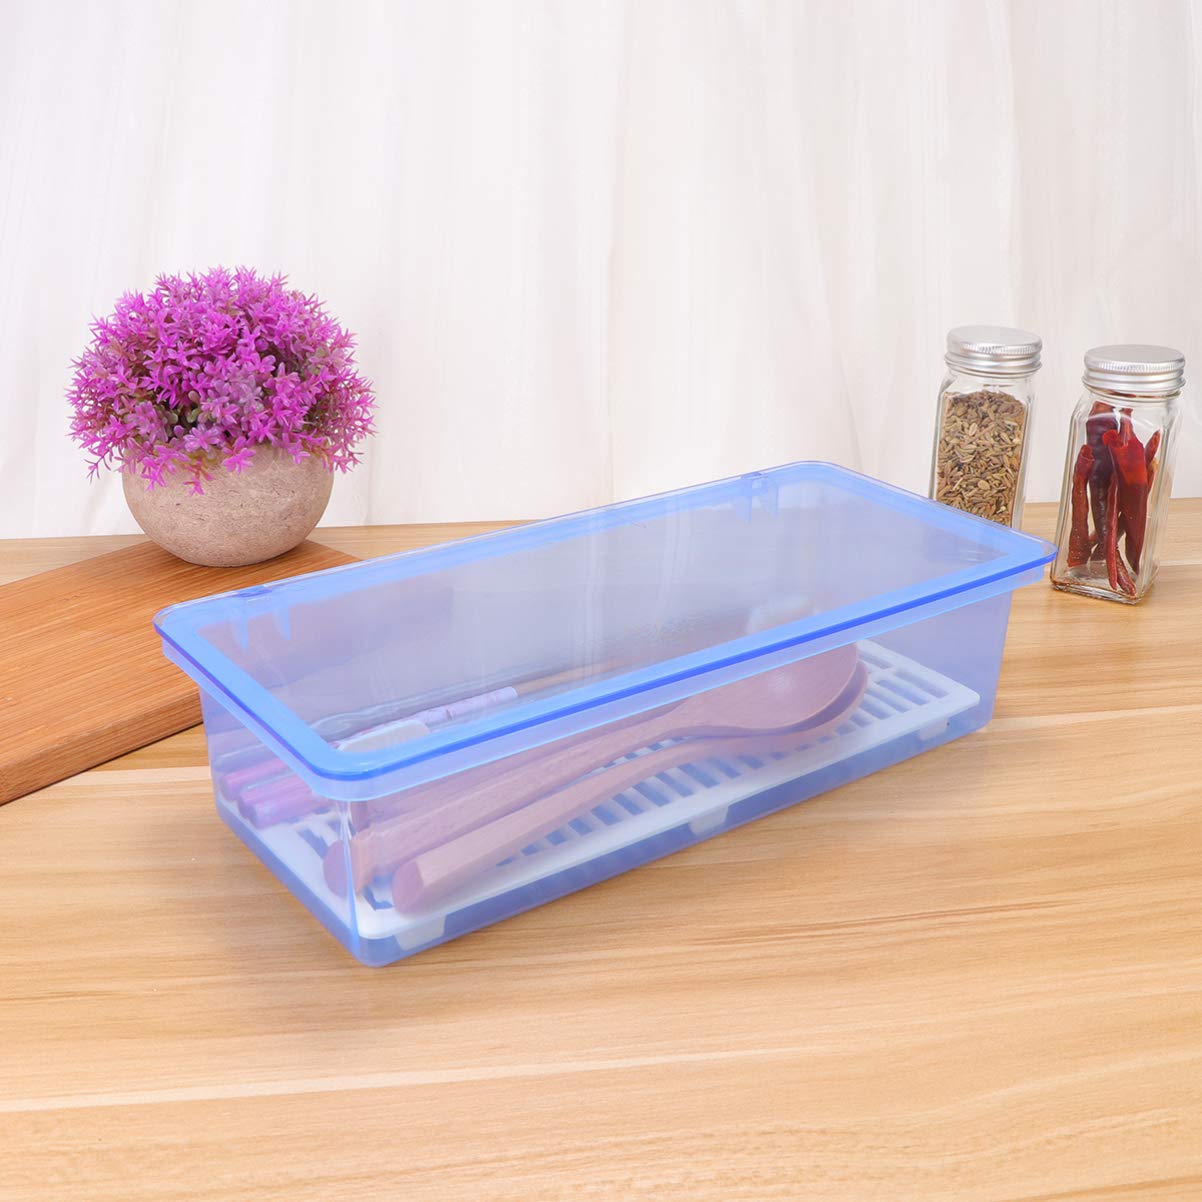 Gatuida Flatware Tray Kitchen Drawer Organizer With Lid And Drainer, Plastic Kitchen Cutlery Tray and Utensil Storage Container with Cover,- proof Dinnerware Holder